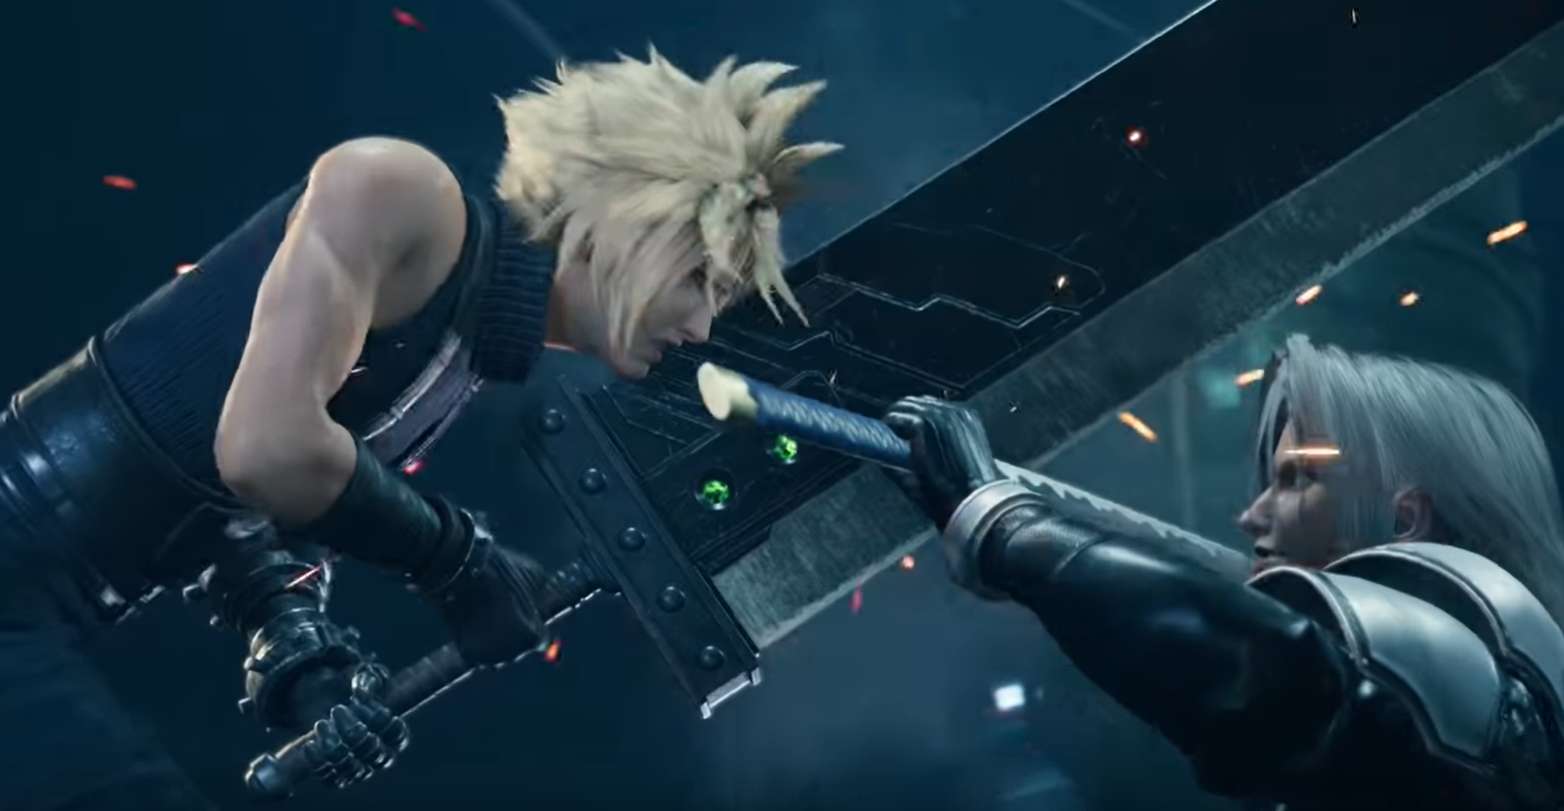 The Installation Size For Final Fantasy 7 Remake Is Reported To Be Over 100 GB And Might Be Slow To Download